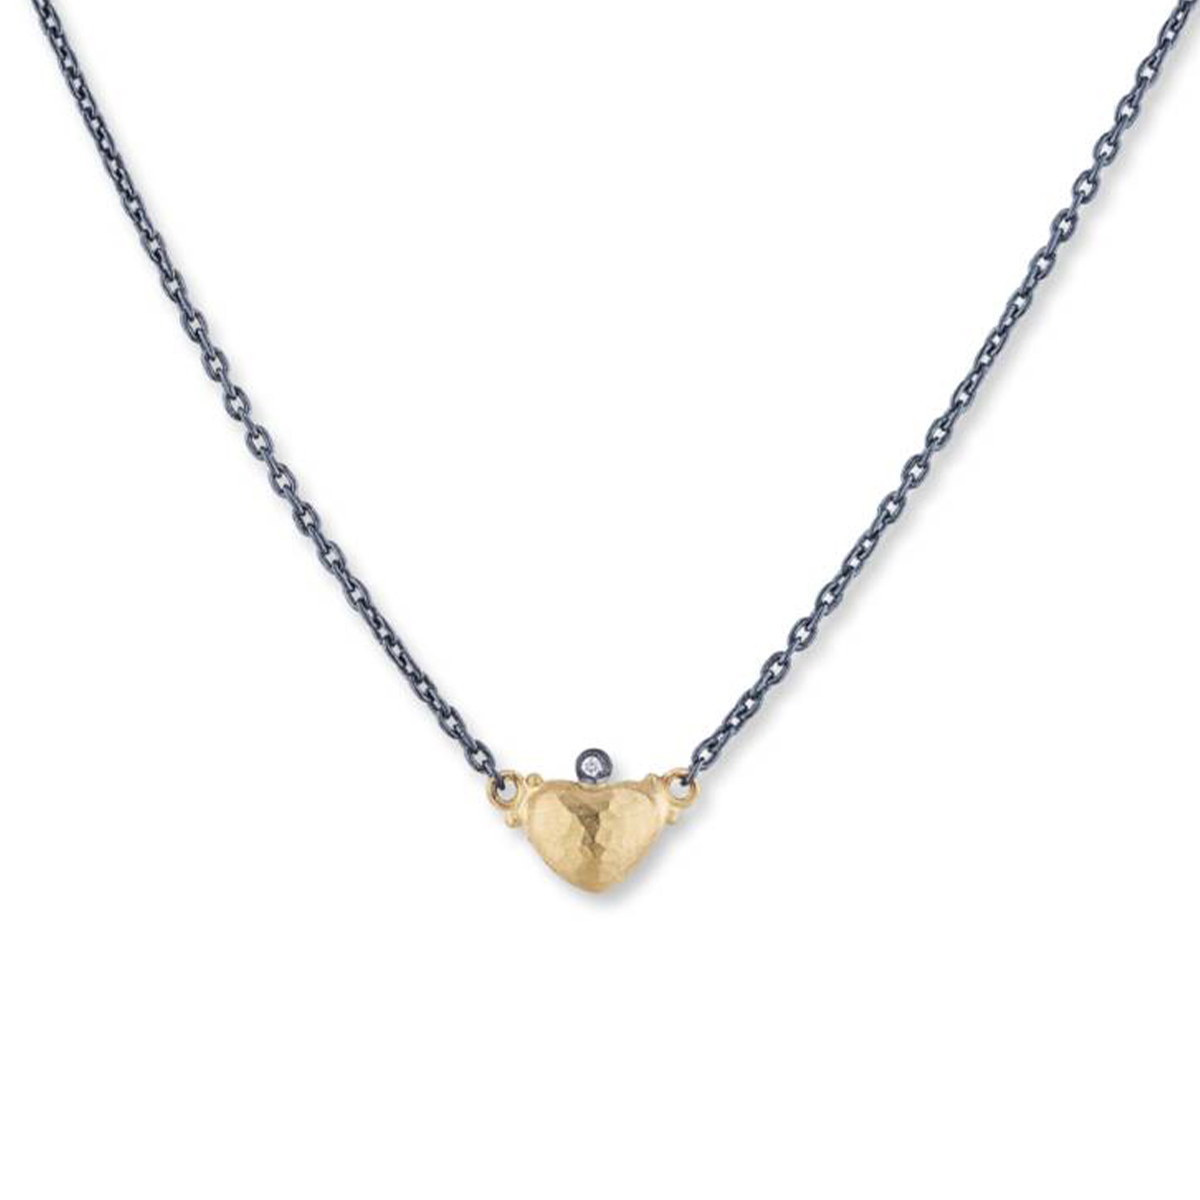 Sterling Silver and 24K Yellow Gold "Stockholm Love" Diamond Necklace